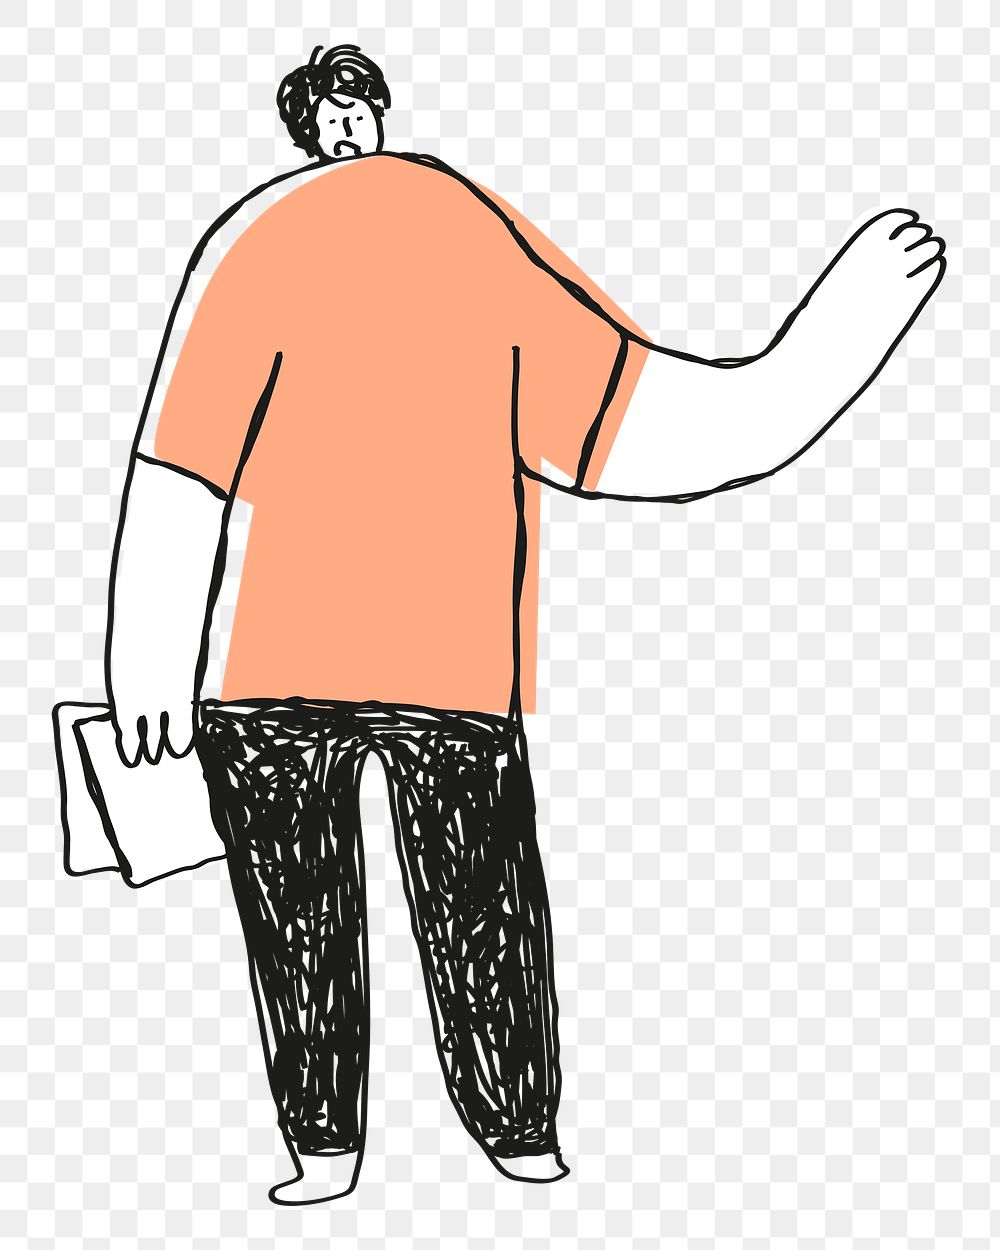 Cute office orange man png holding papers doodle icon